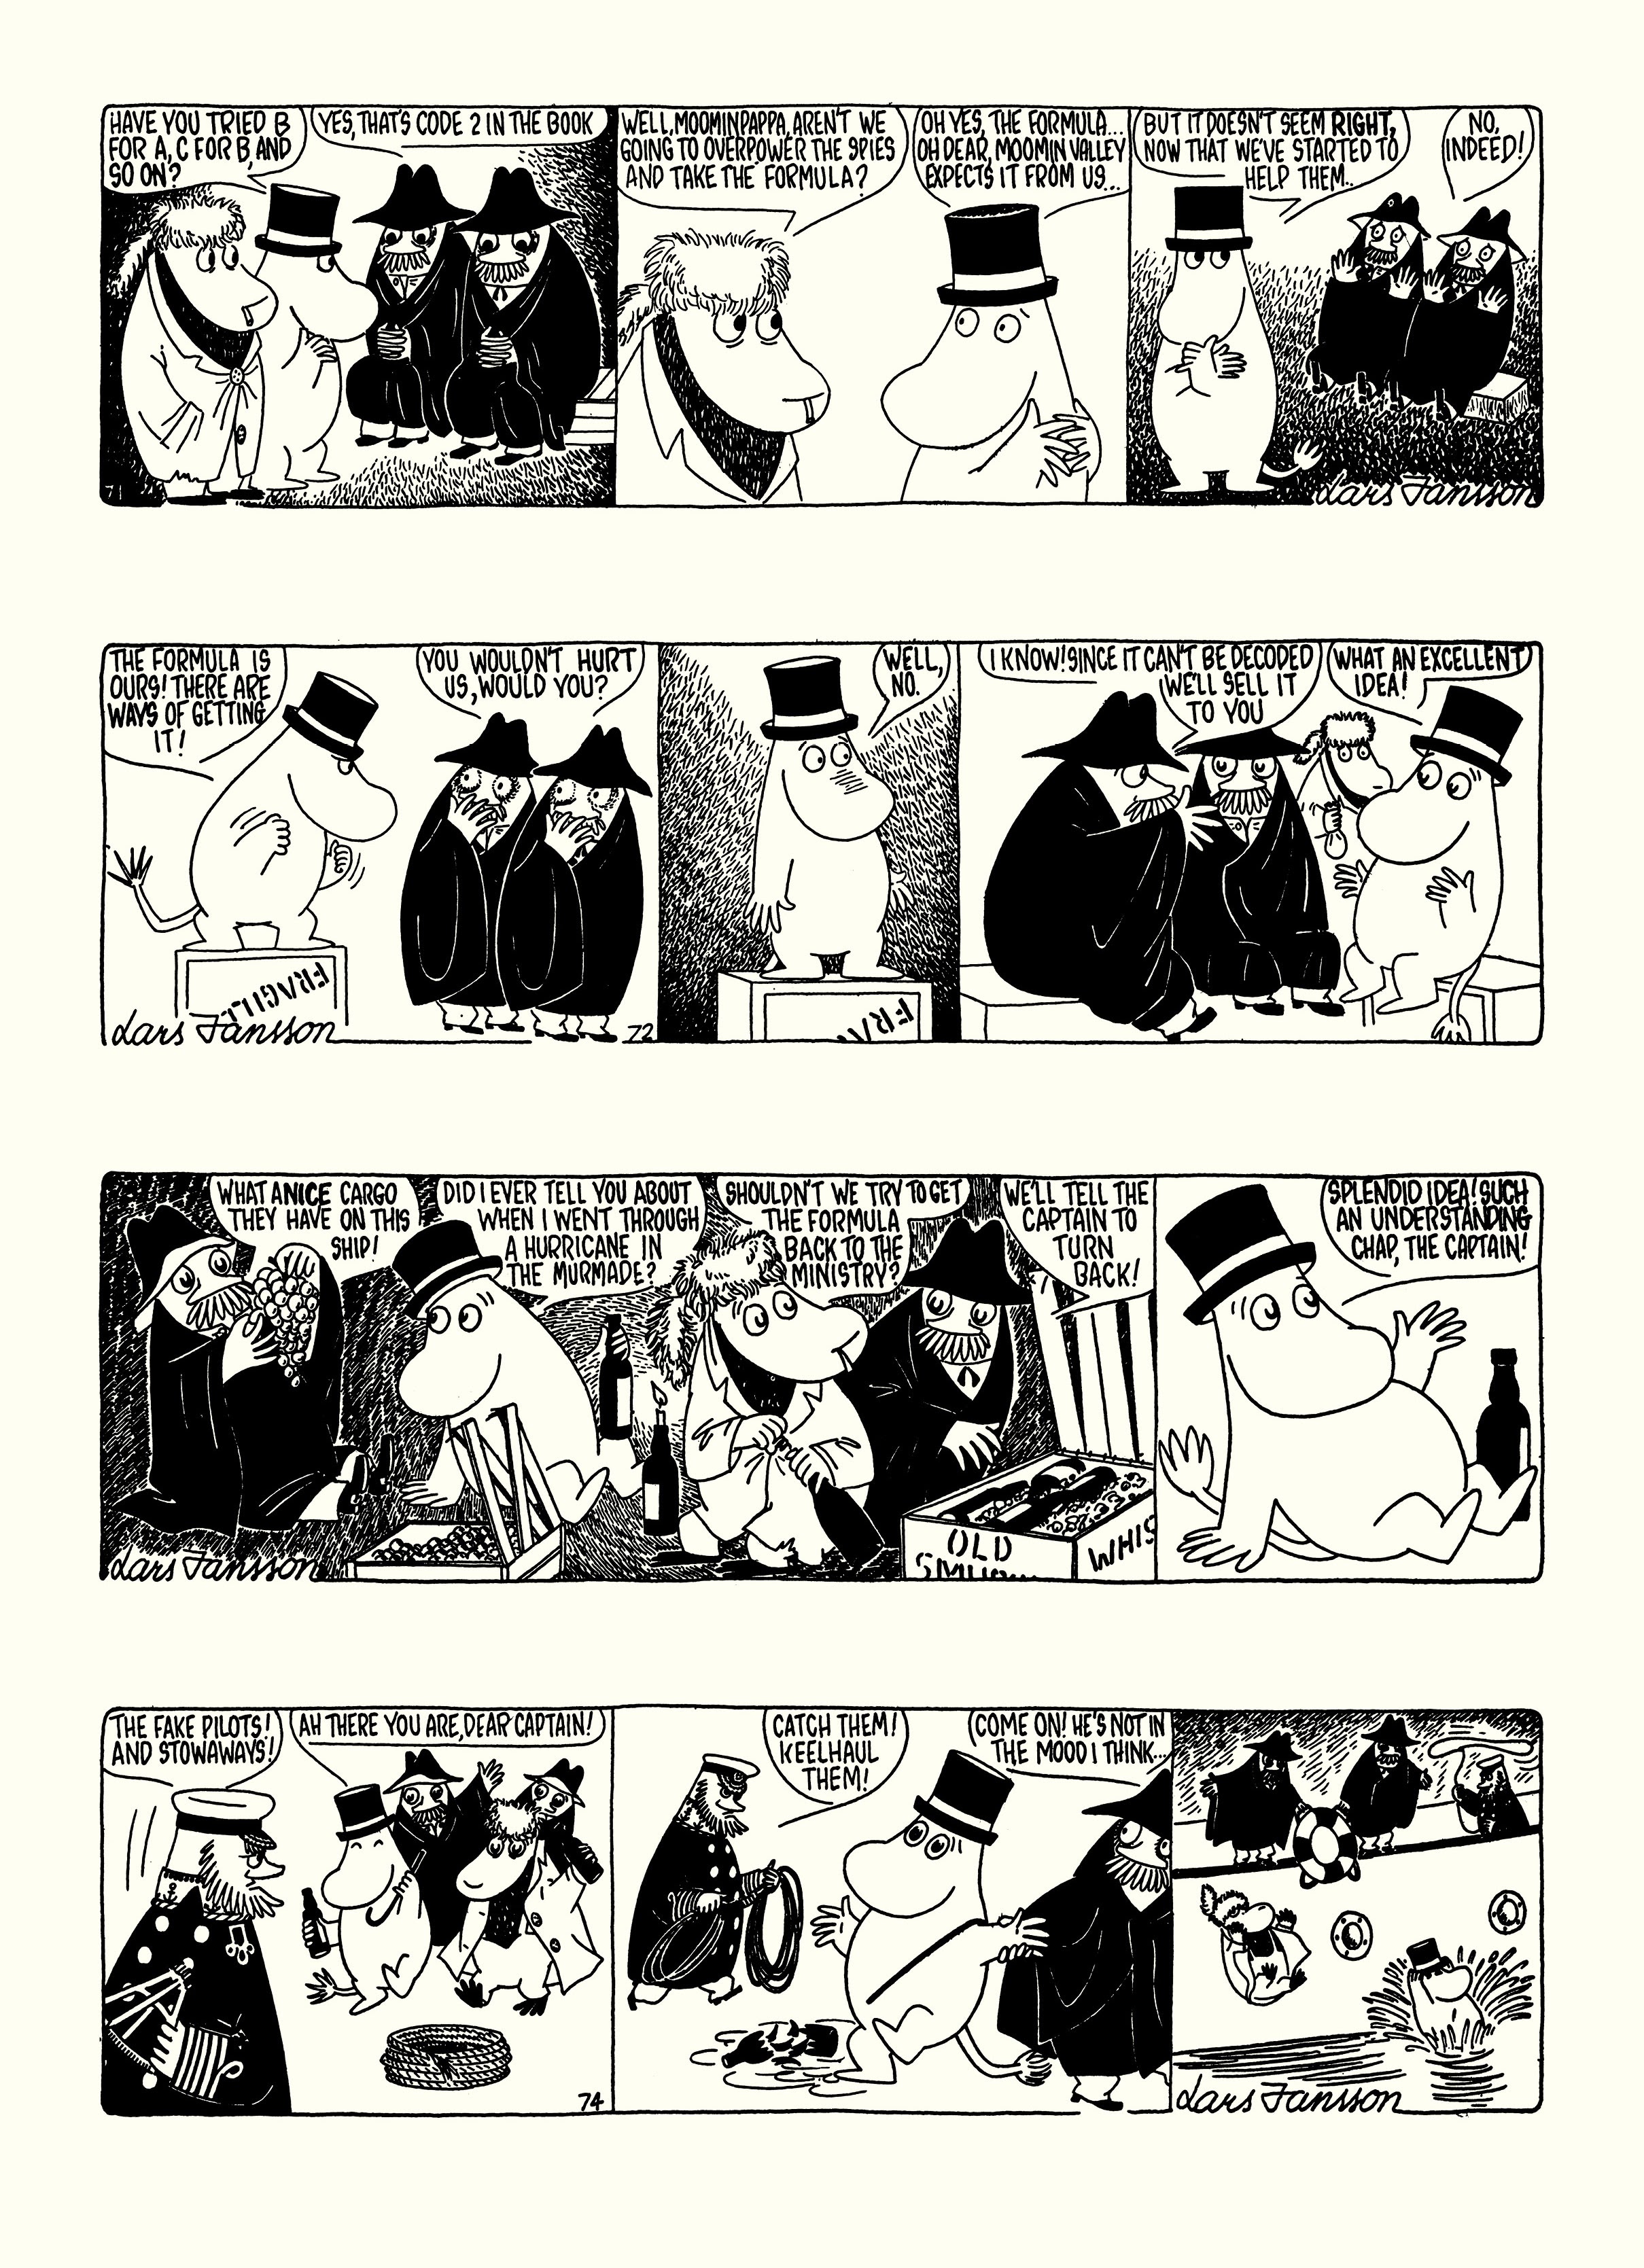 Read online Moomin: The Complete Lars Jansson Comic Strip comic -  Issue # TPB 6 - 65